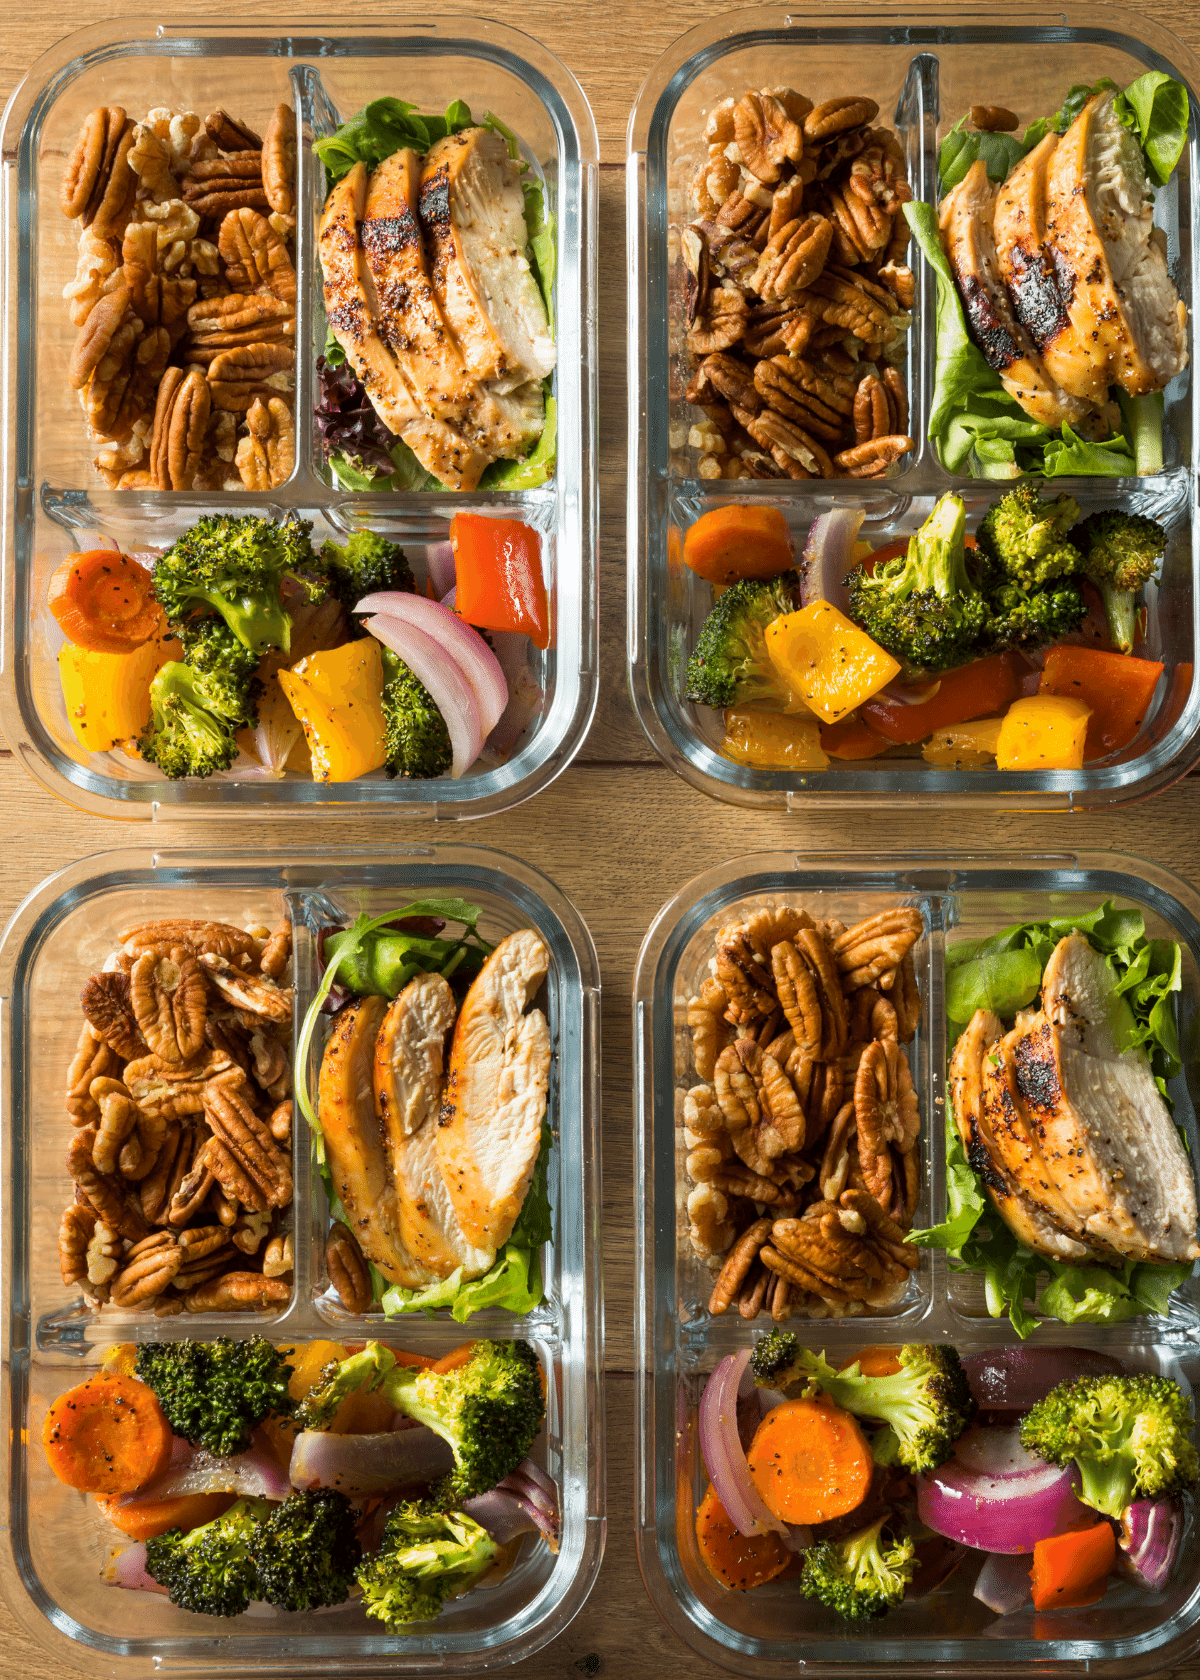 https://www.ratingsetgo.com/content/images/2022/08/Meal-Prep-Lunch-Box.png